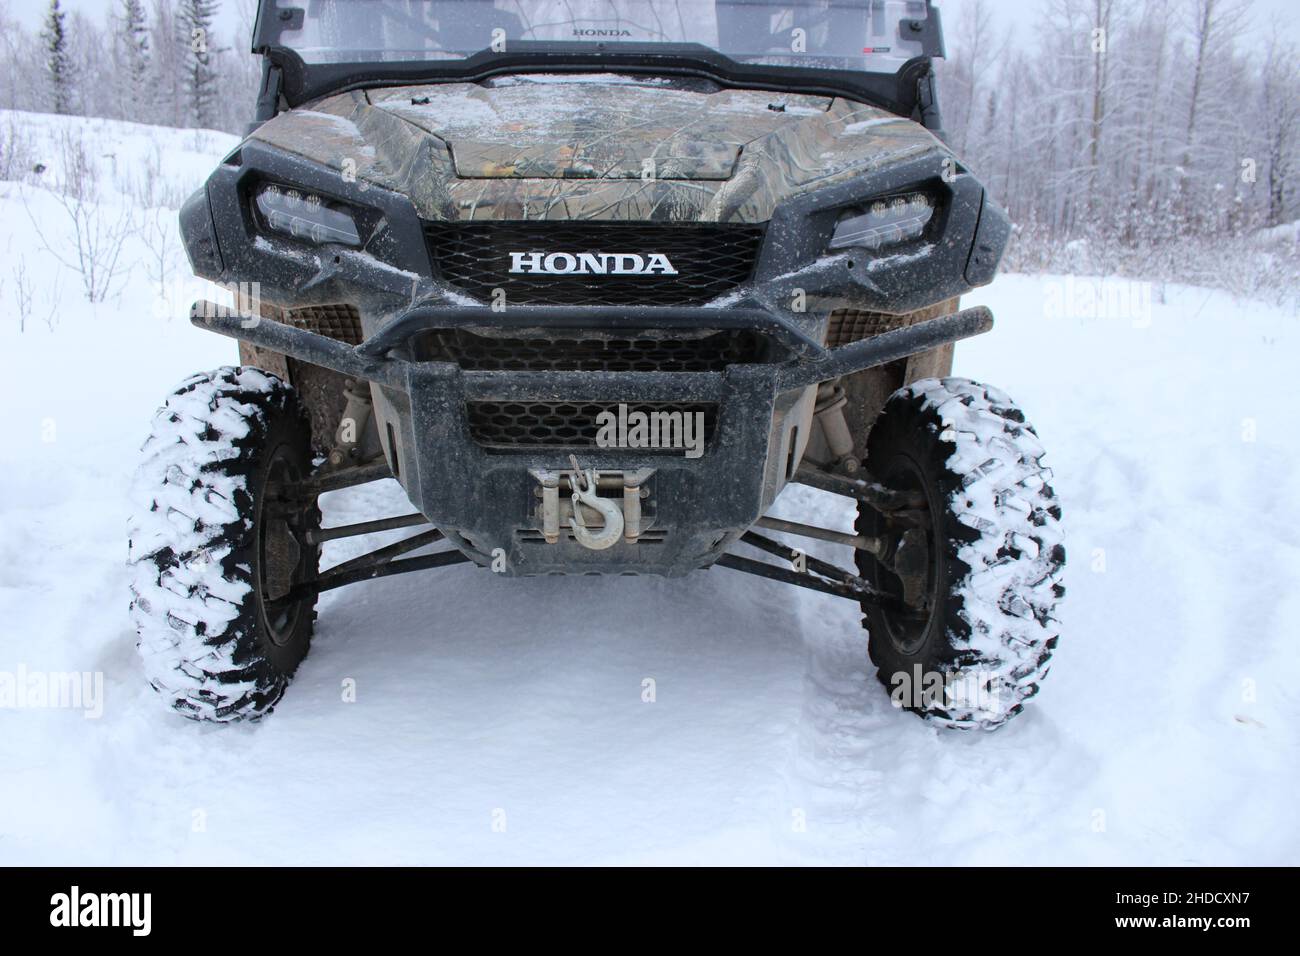 Exploring outdoors during the wintertime with a side-by-side honda pioneer. Stock Photo